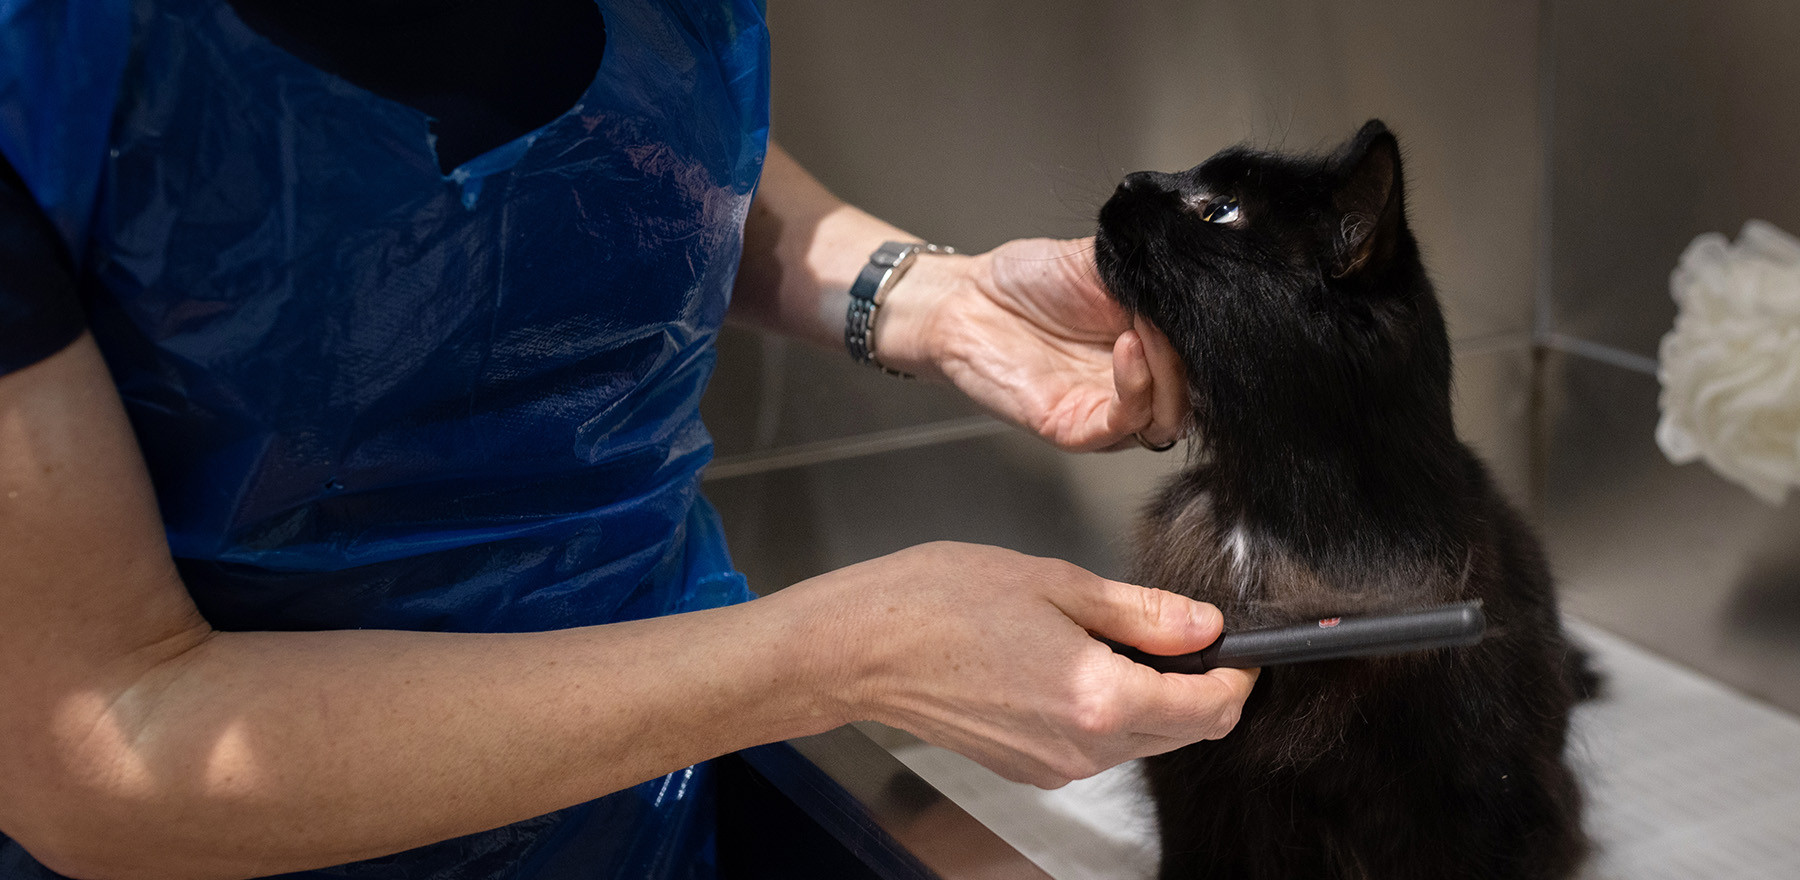 Dedicated cat grooming facilities with experienced, specialist groomers